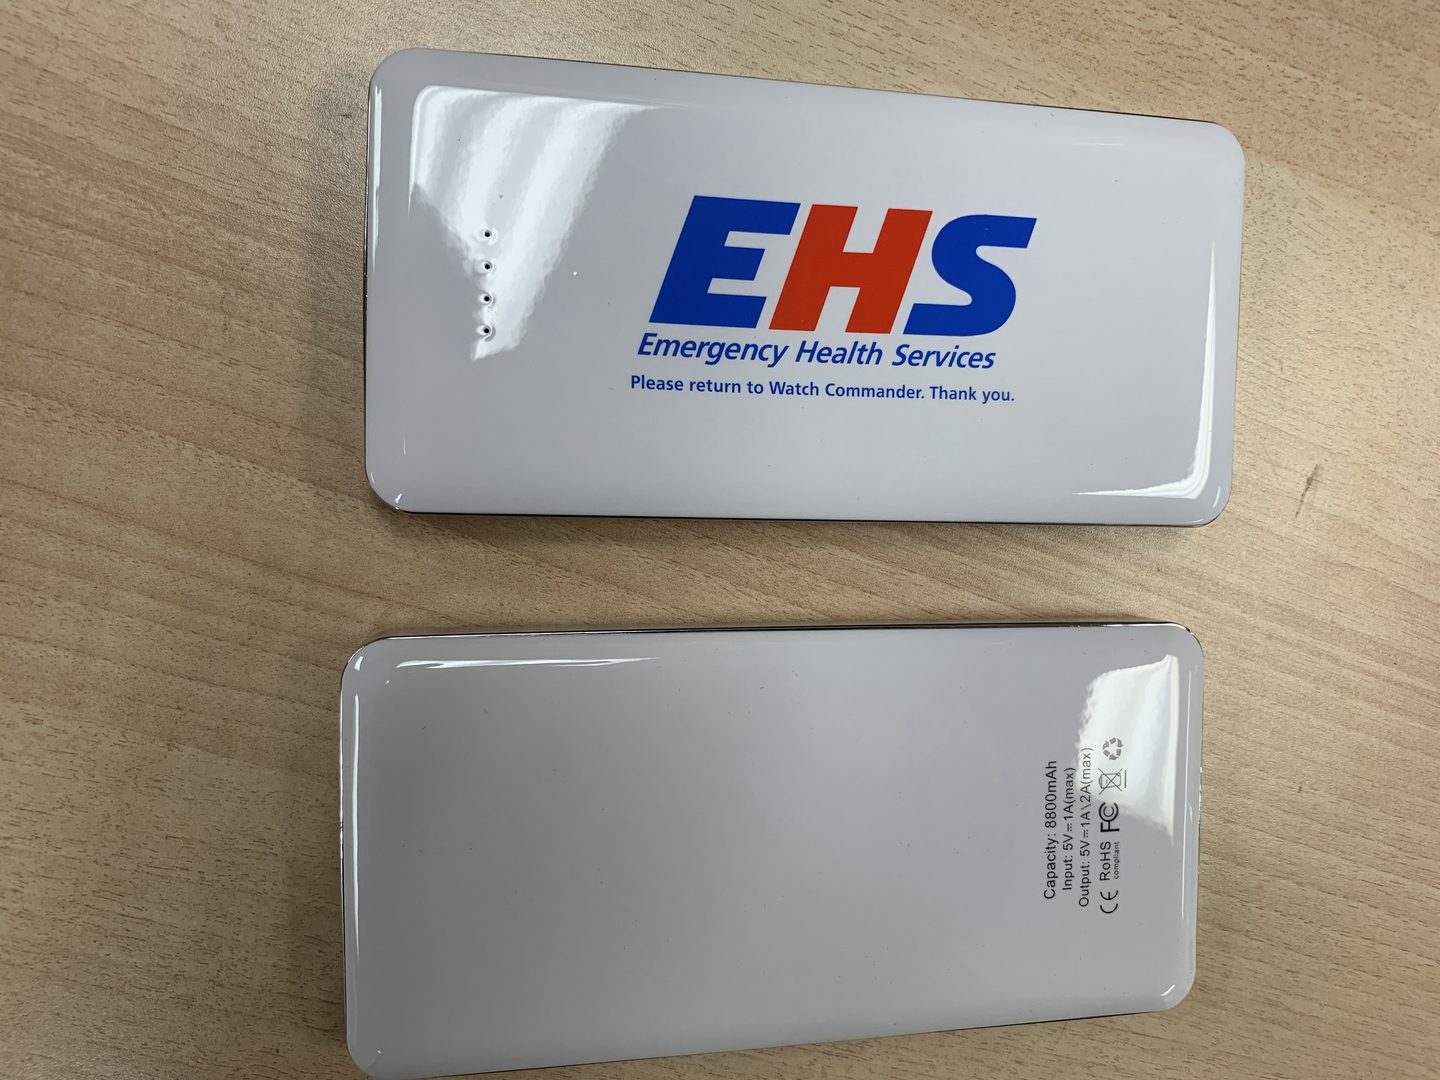 An EHS labeled High Capacity Power Banks